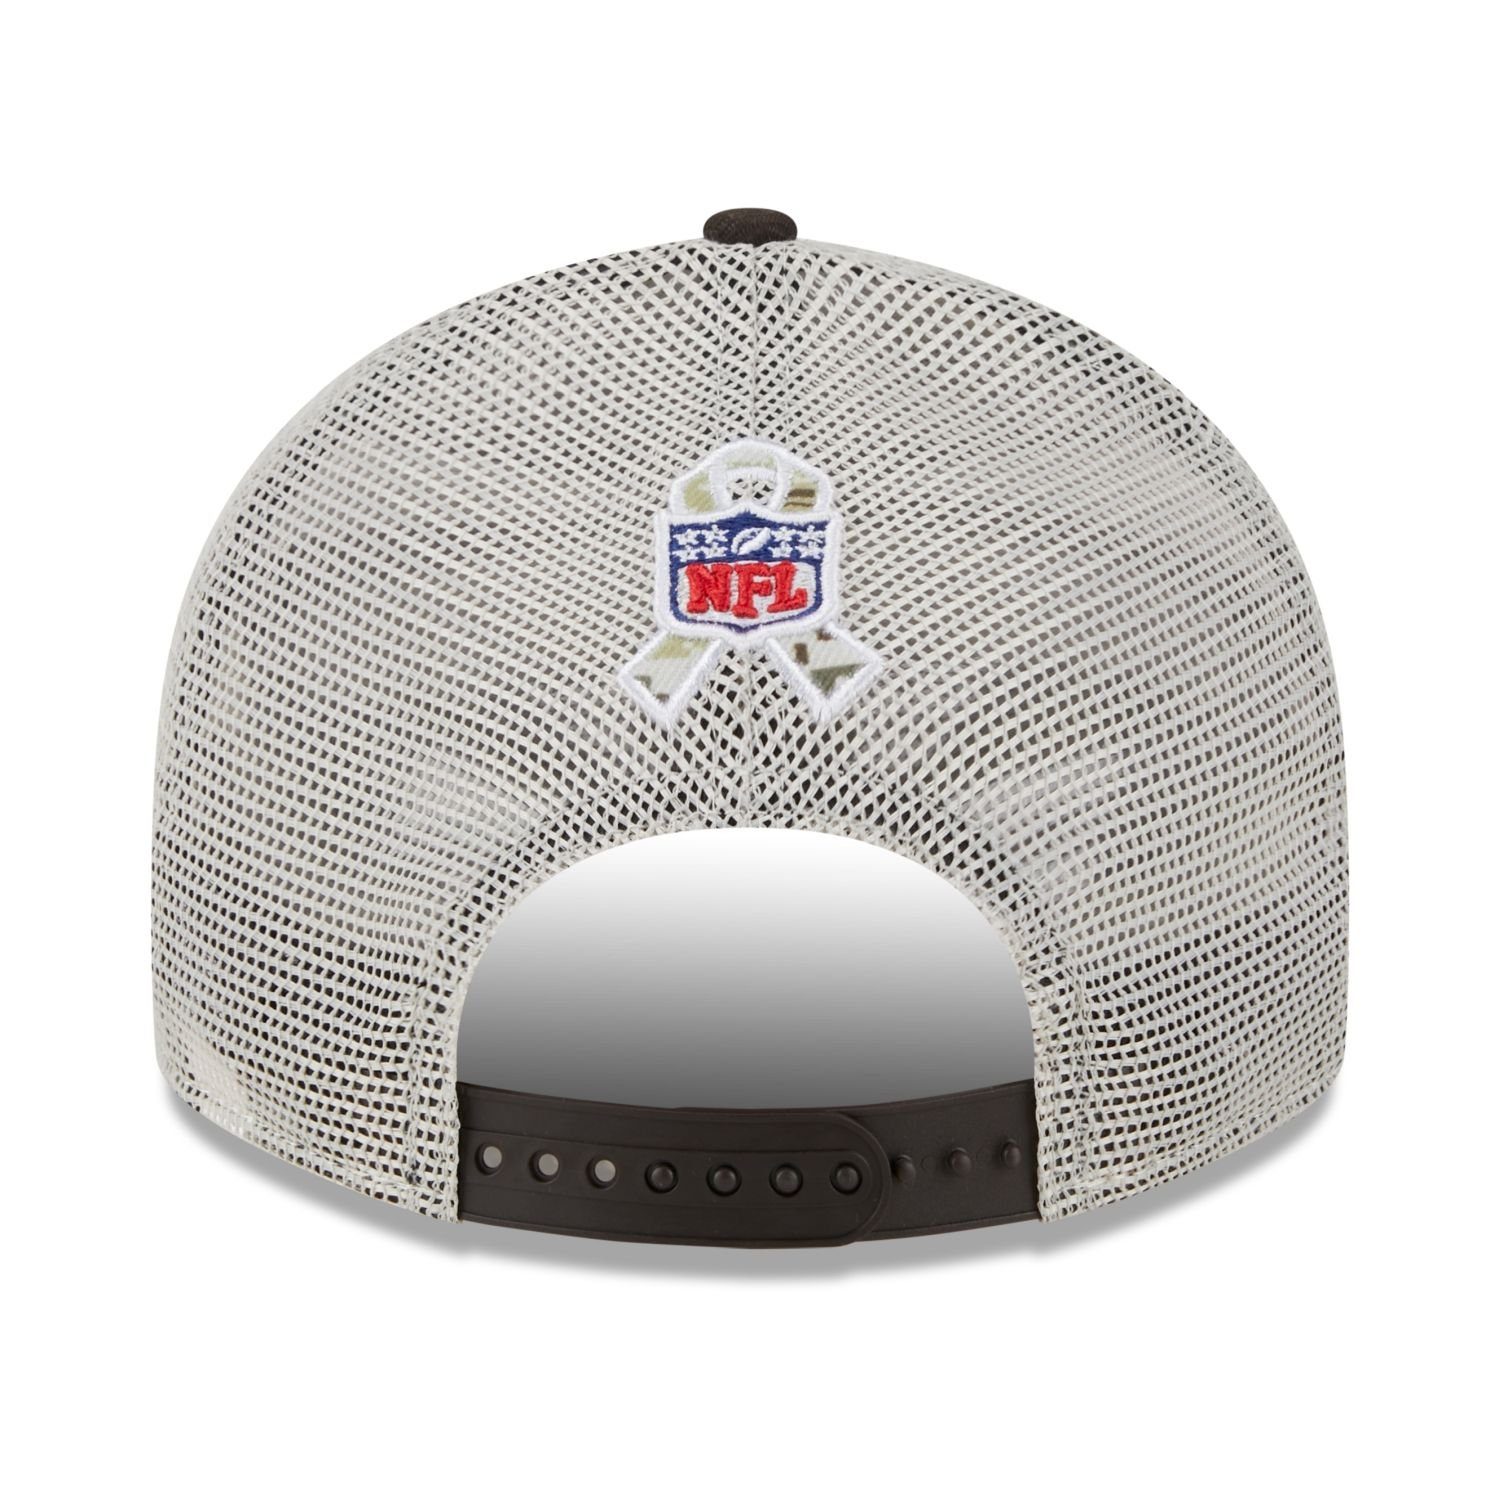 Era Service Snap Browns New Salute Cap Profile to NFL 9Fifty Low Snapback Cleveland